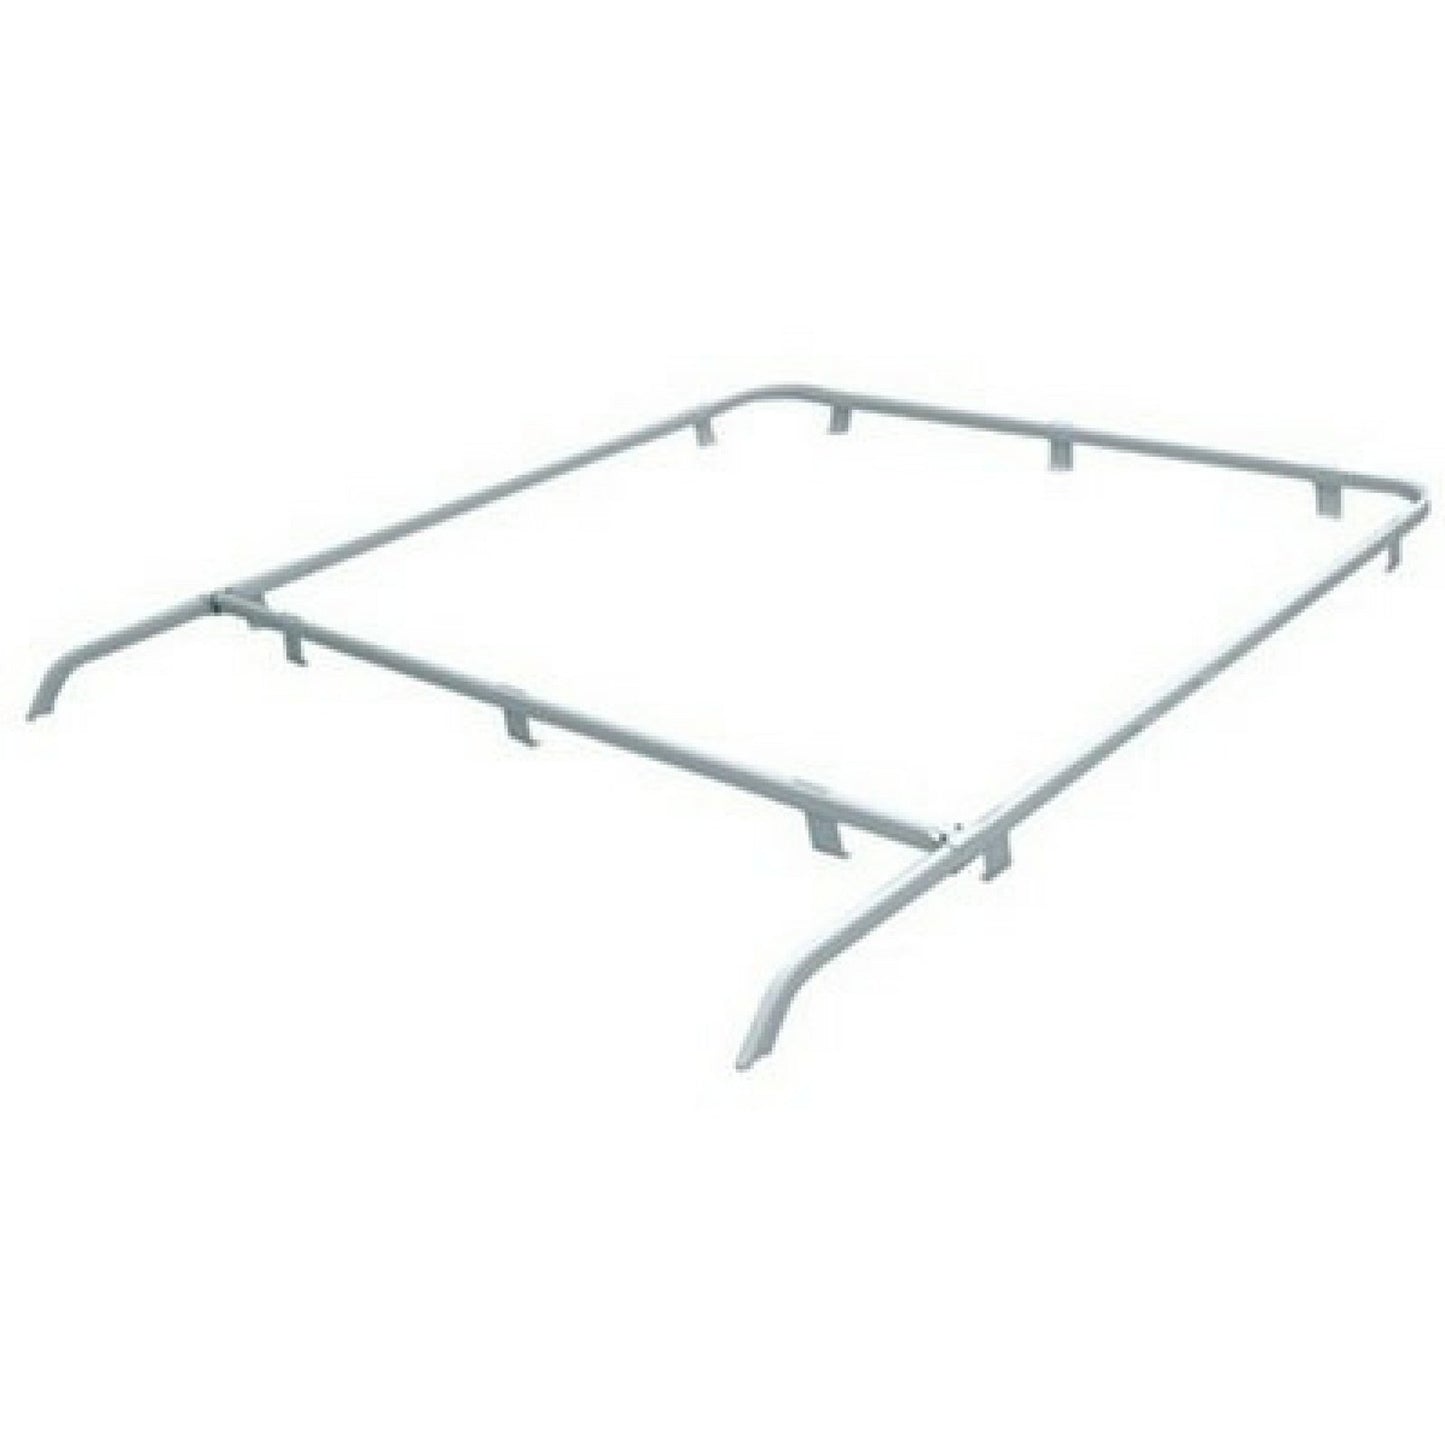 Fiamma White Motorhome Roof Rack made by Fiamma. A Accessories sold by Quality Caravan Awnings